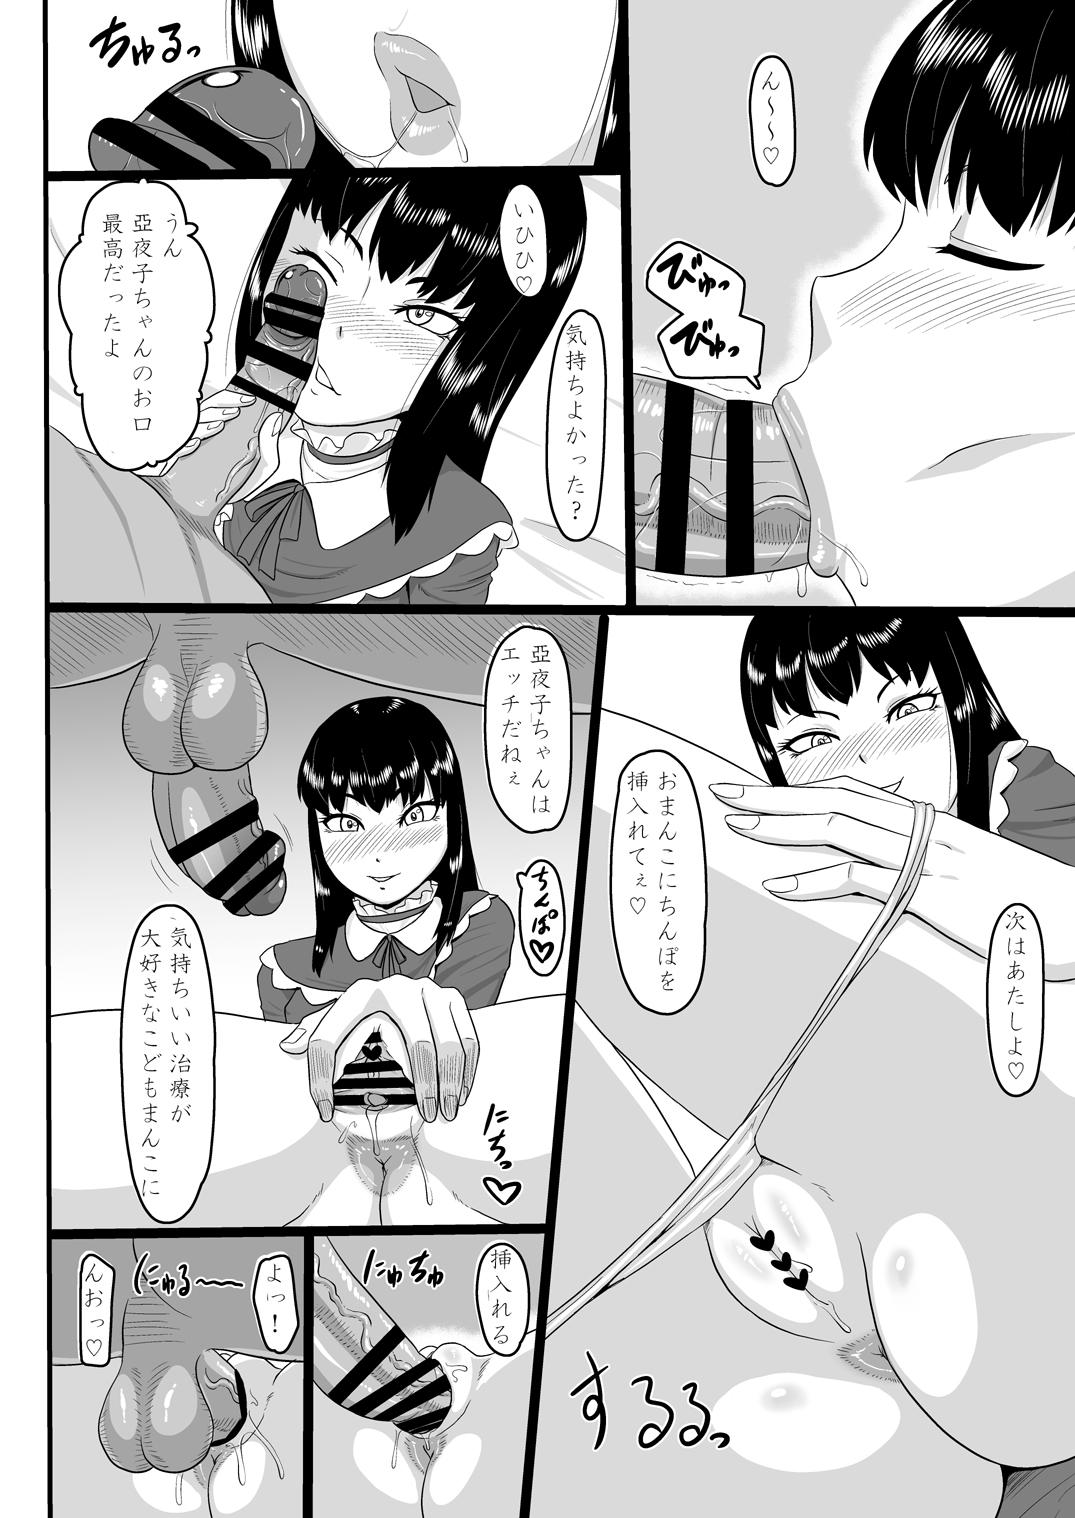 Perrito [Oneekyou (ML)] Zero-in 11 -Ayako- (Fatal Frame) - Fatal frame Real Amateurs - Page 6